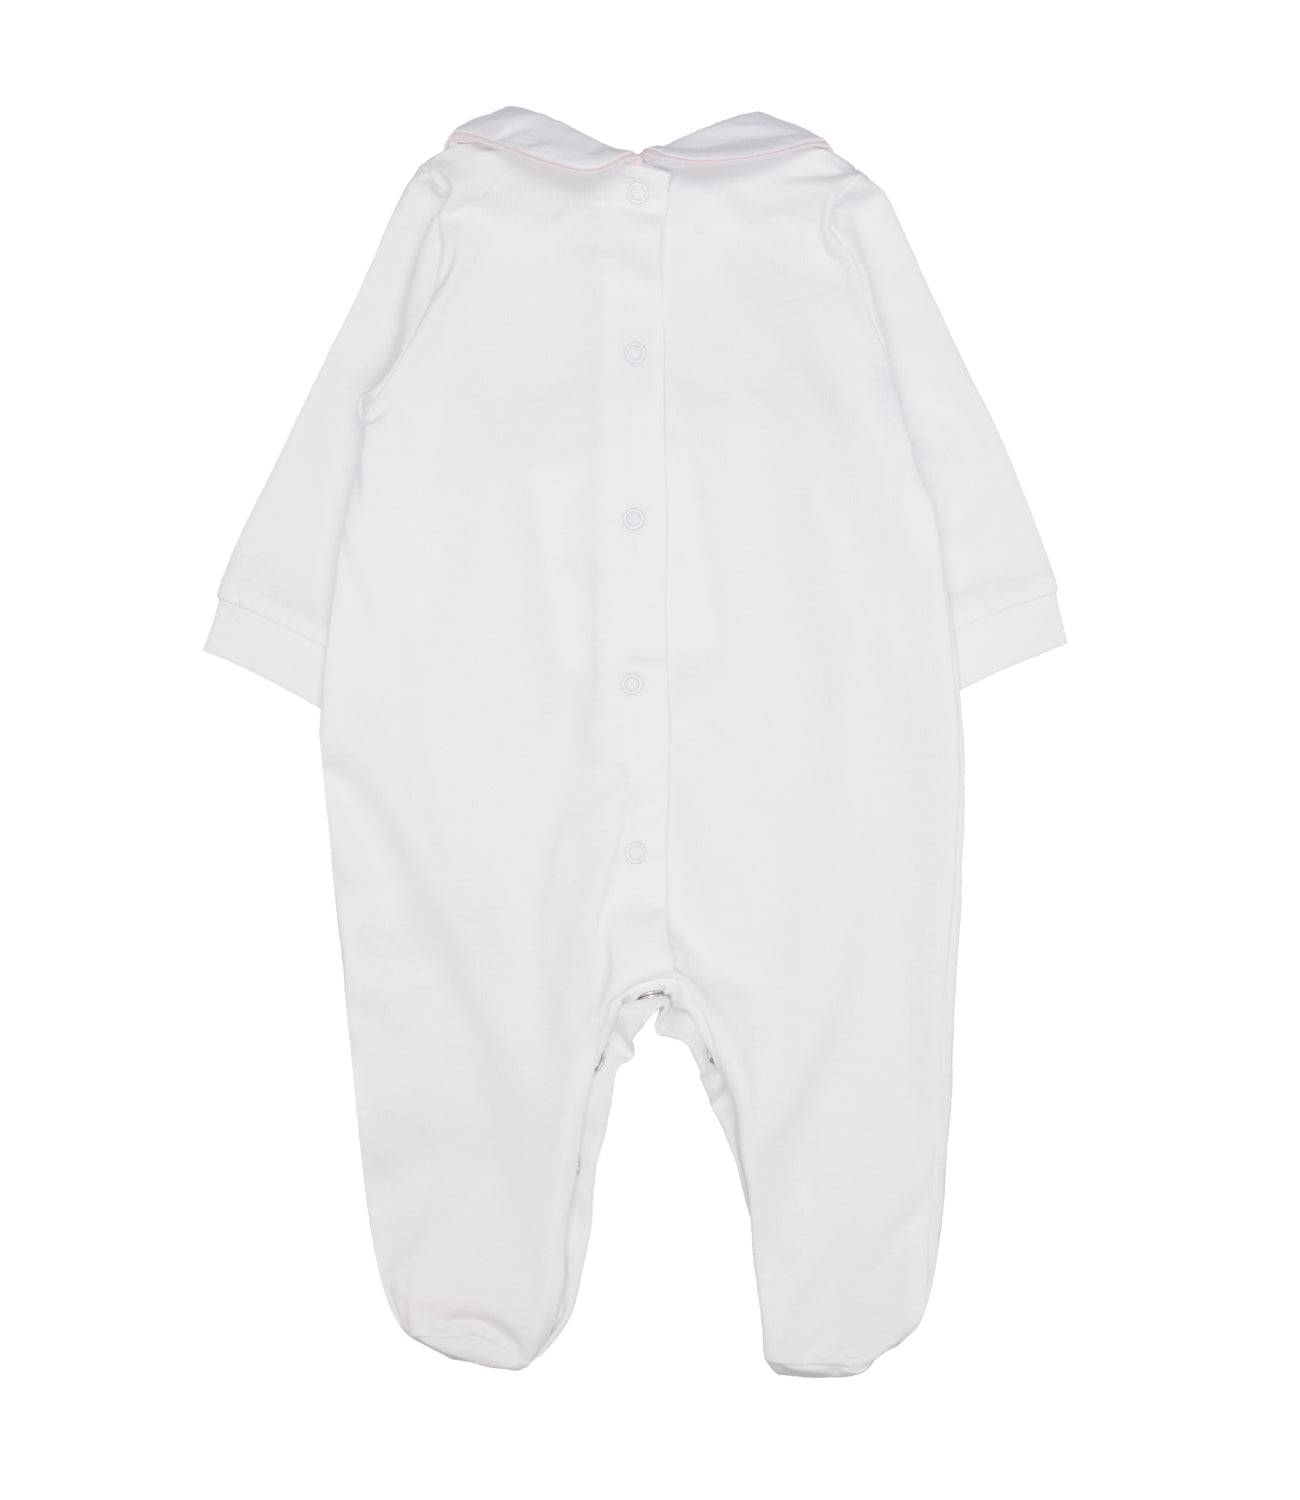 Nanan | Pink and White Sleepsuit